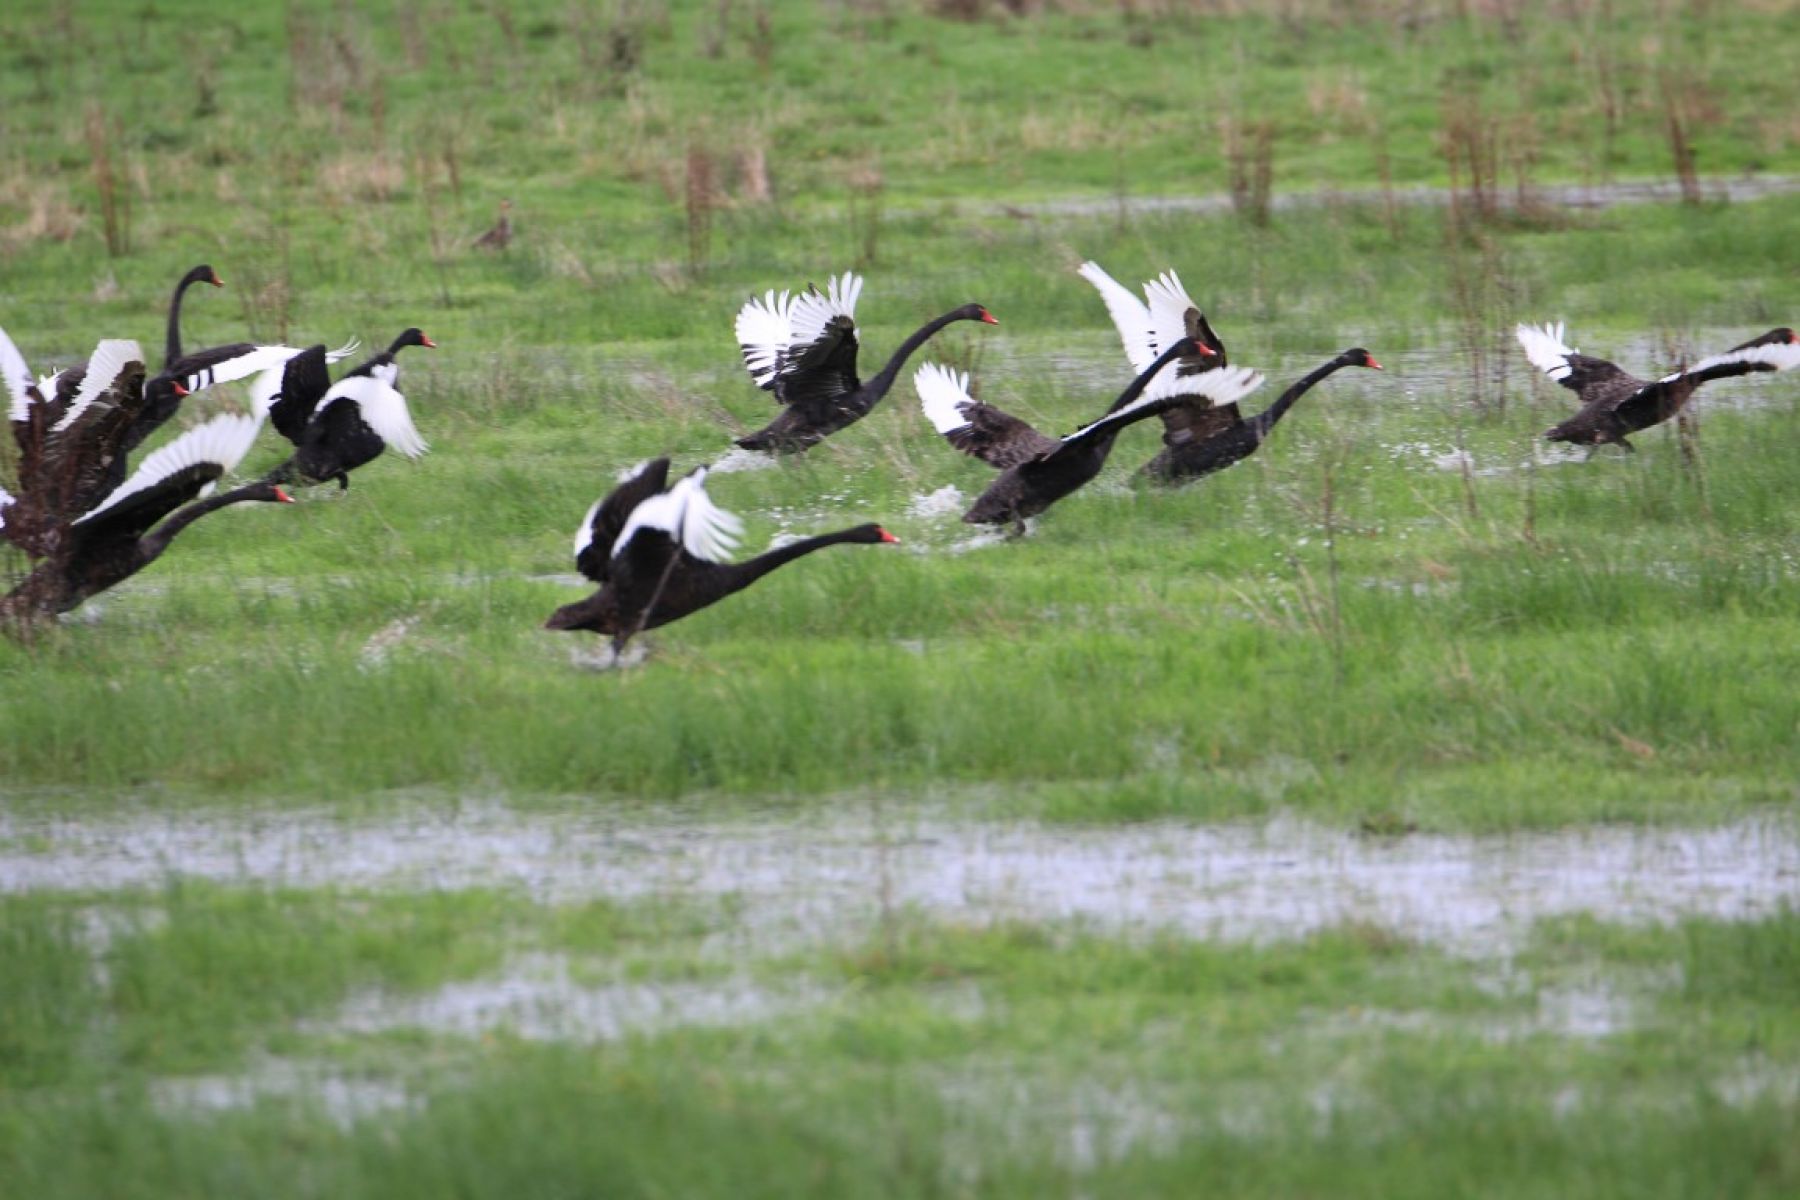 A flock of black swans fly over a grassy patch of wetlands. This bird’s indigenous name is Kunuwar. The scientific name is Cygnus atratus.